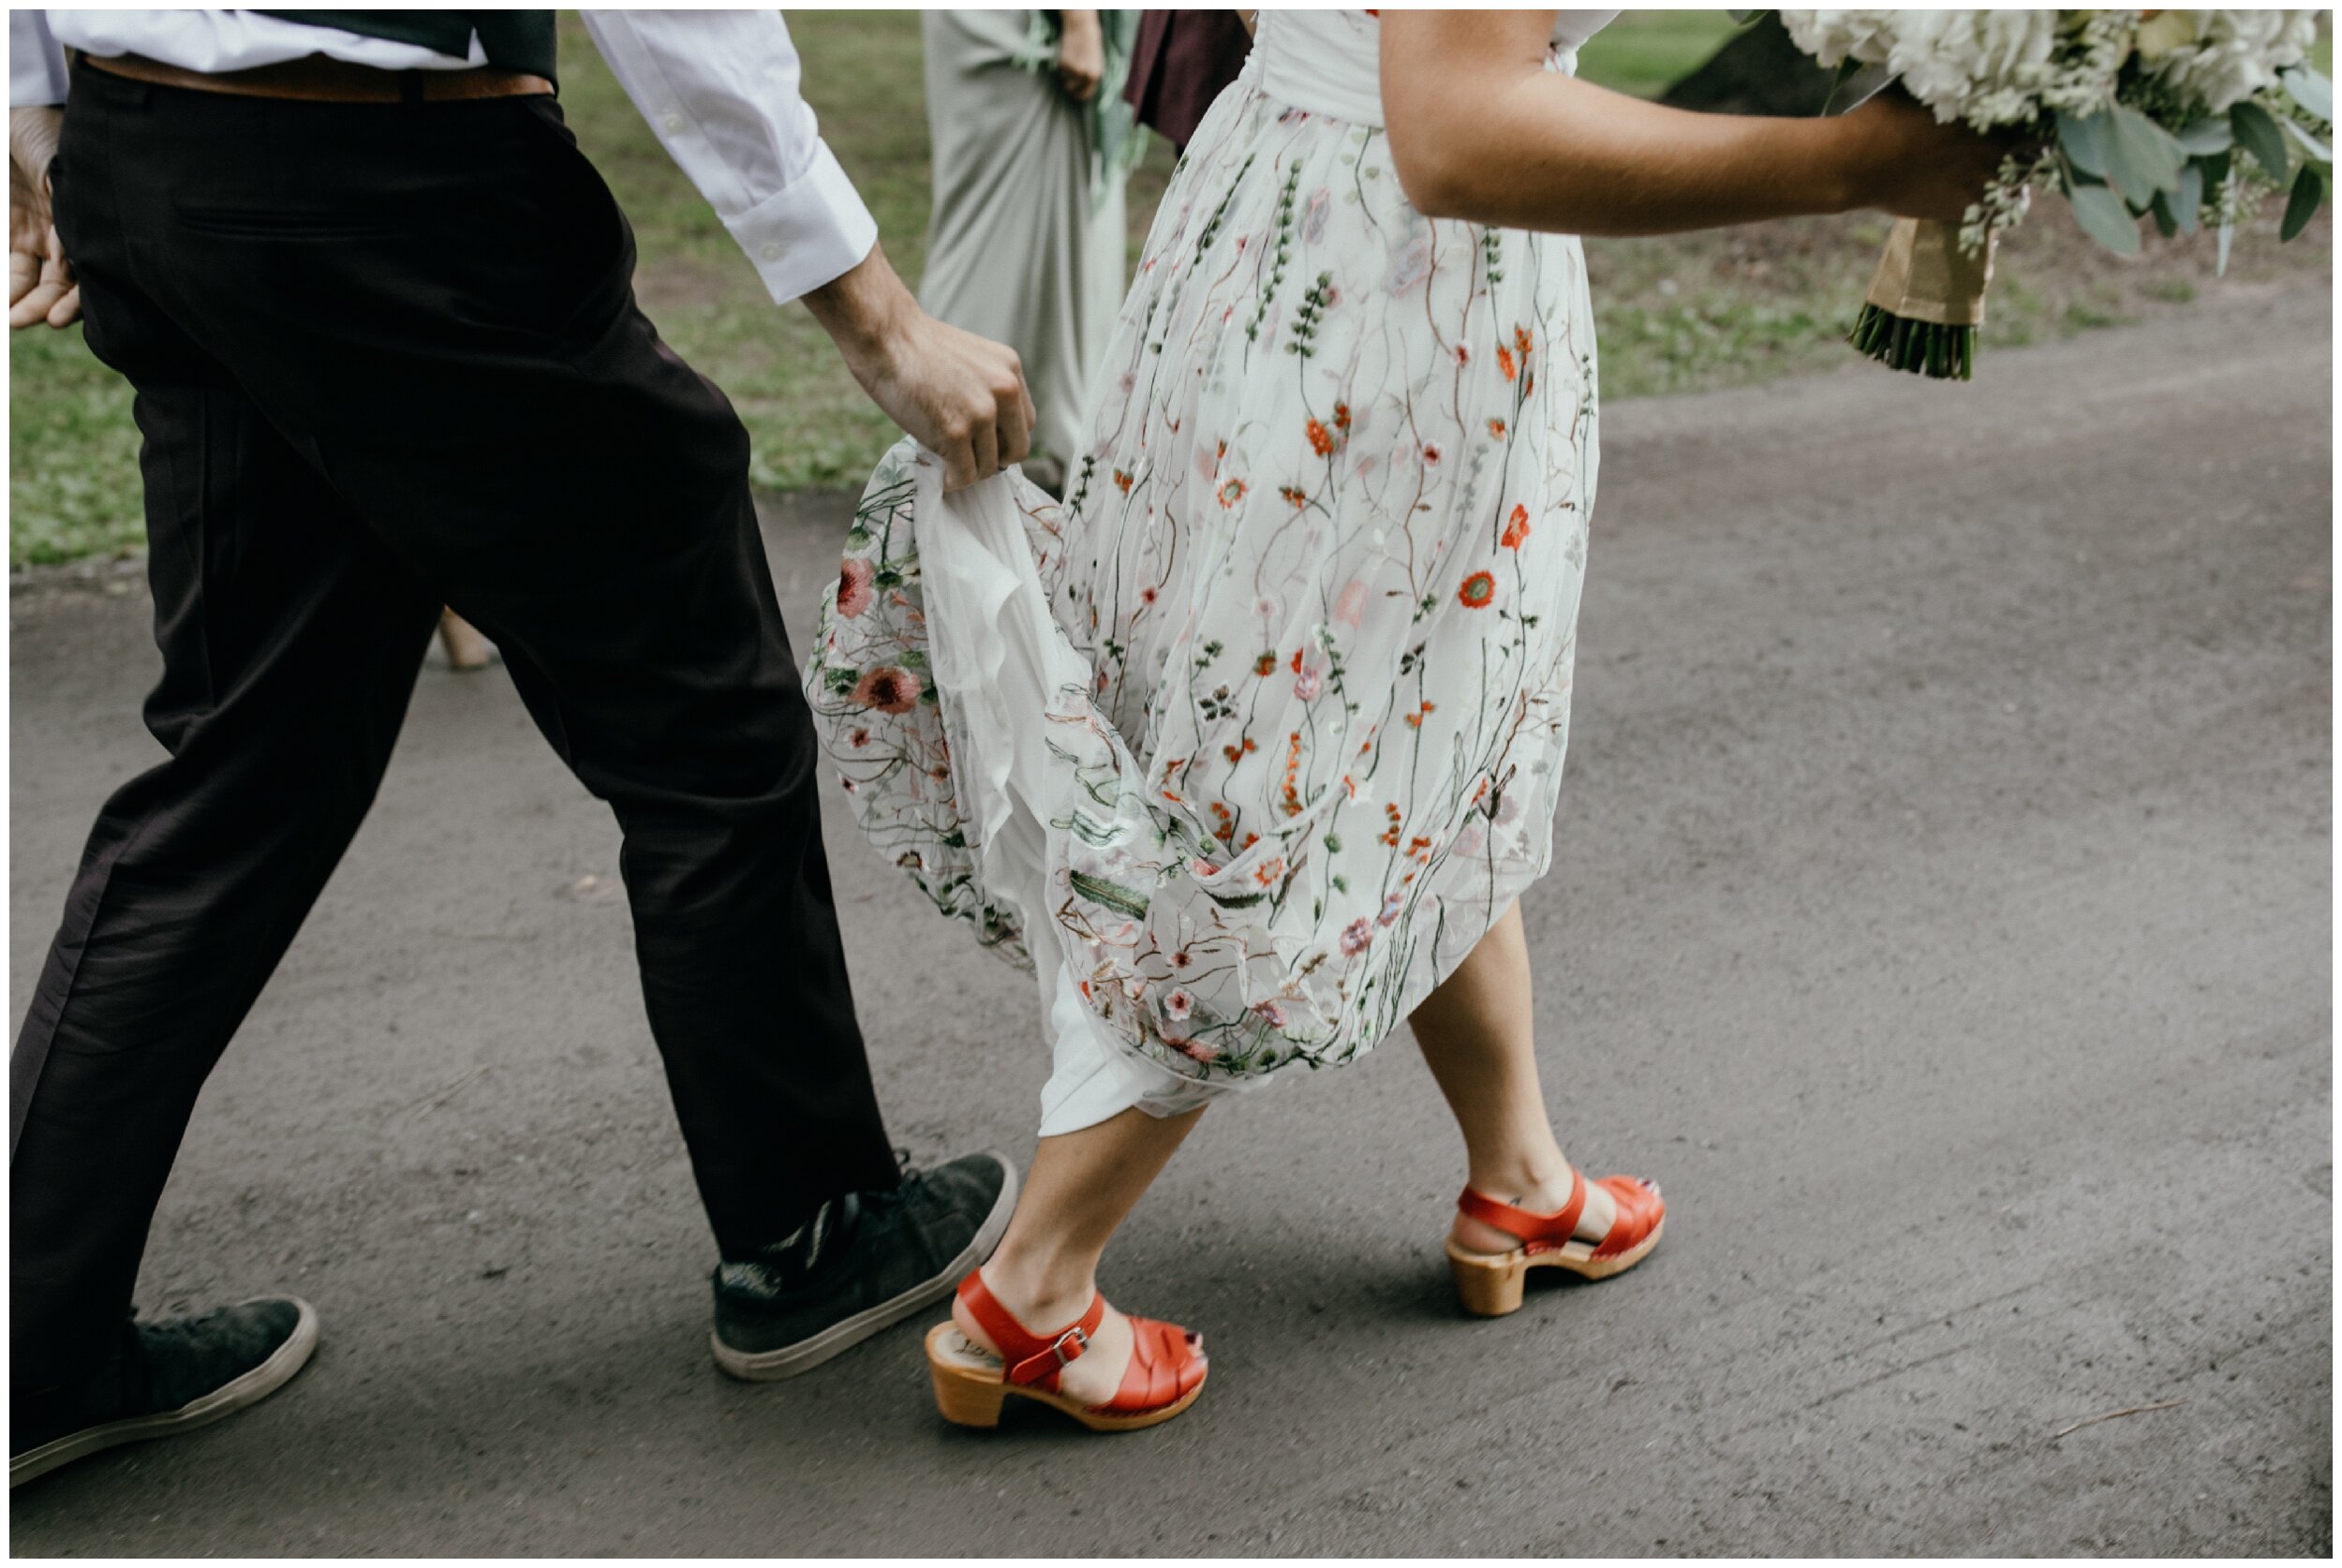 Bride wearing floral print wedding dress and red clogs for Minnesota Summer camp wedding